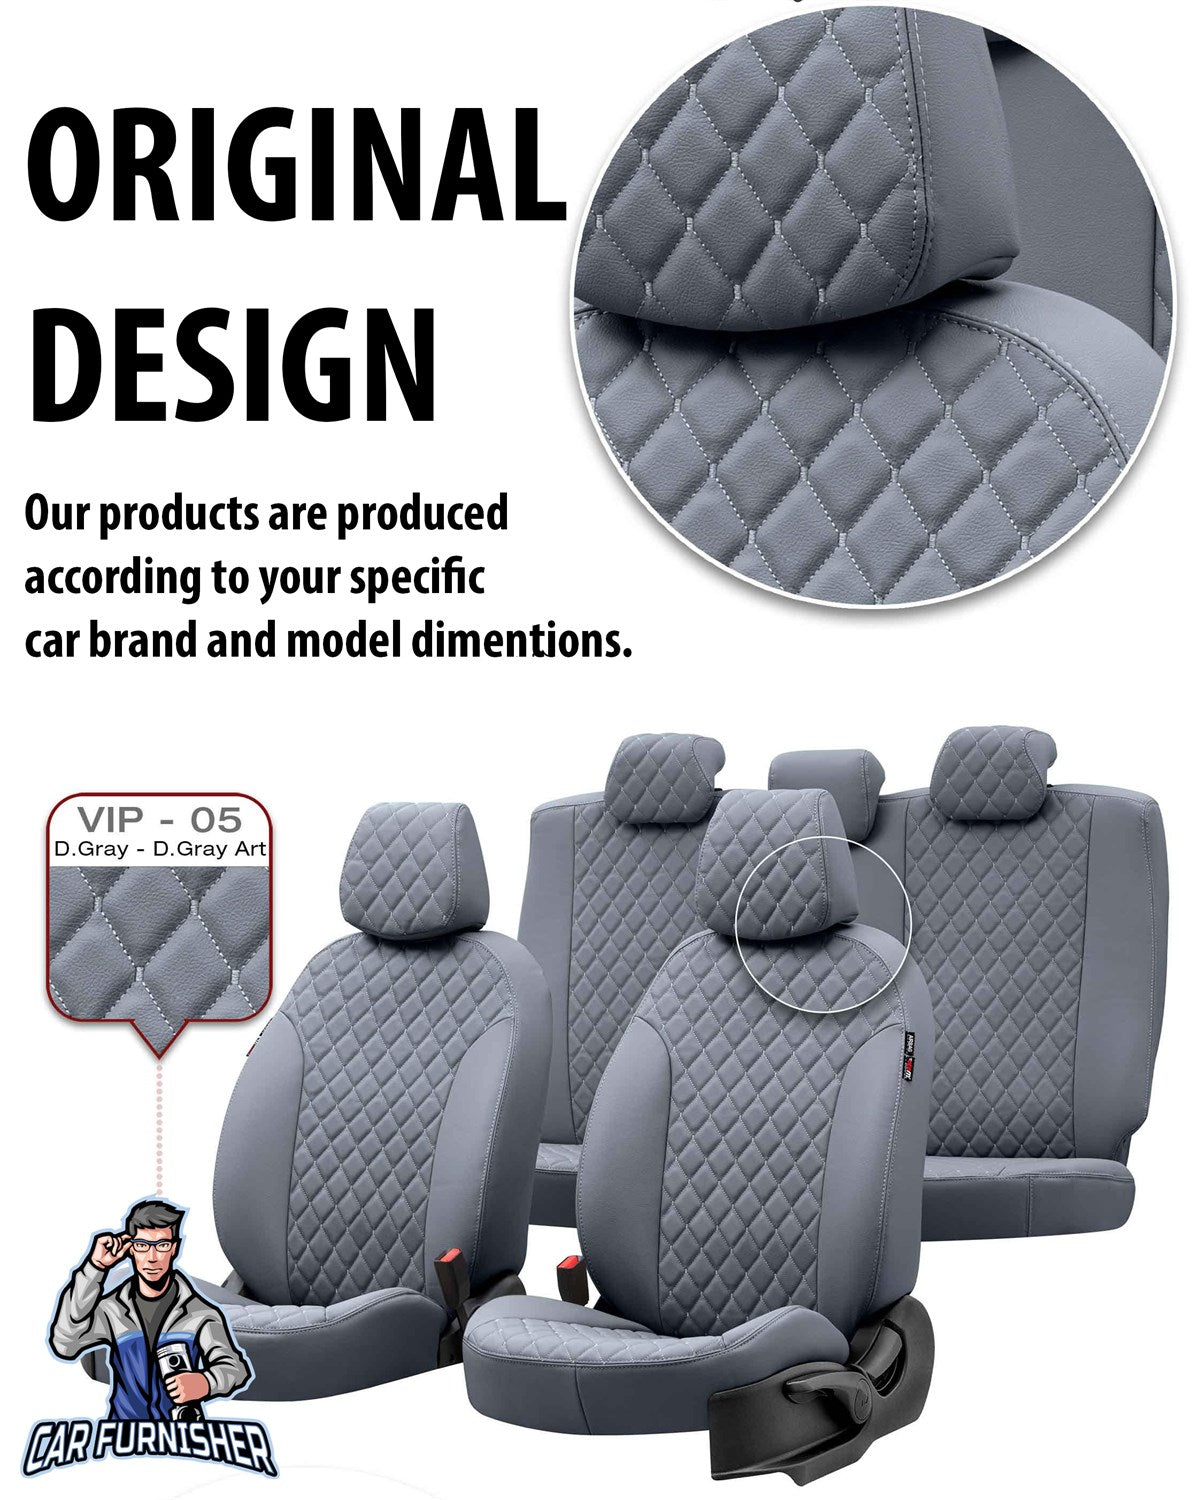 Mitsubishi Colt Seat Covers Madrid Leather Design Beige Leather